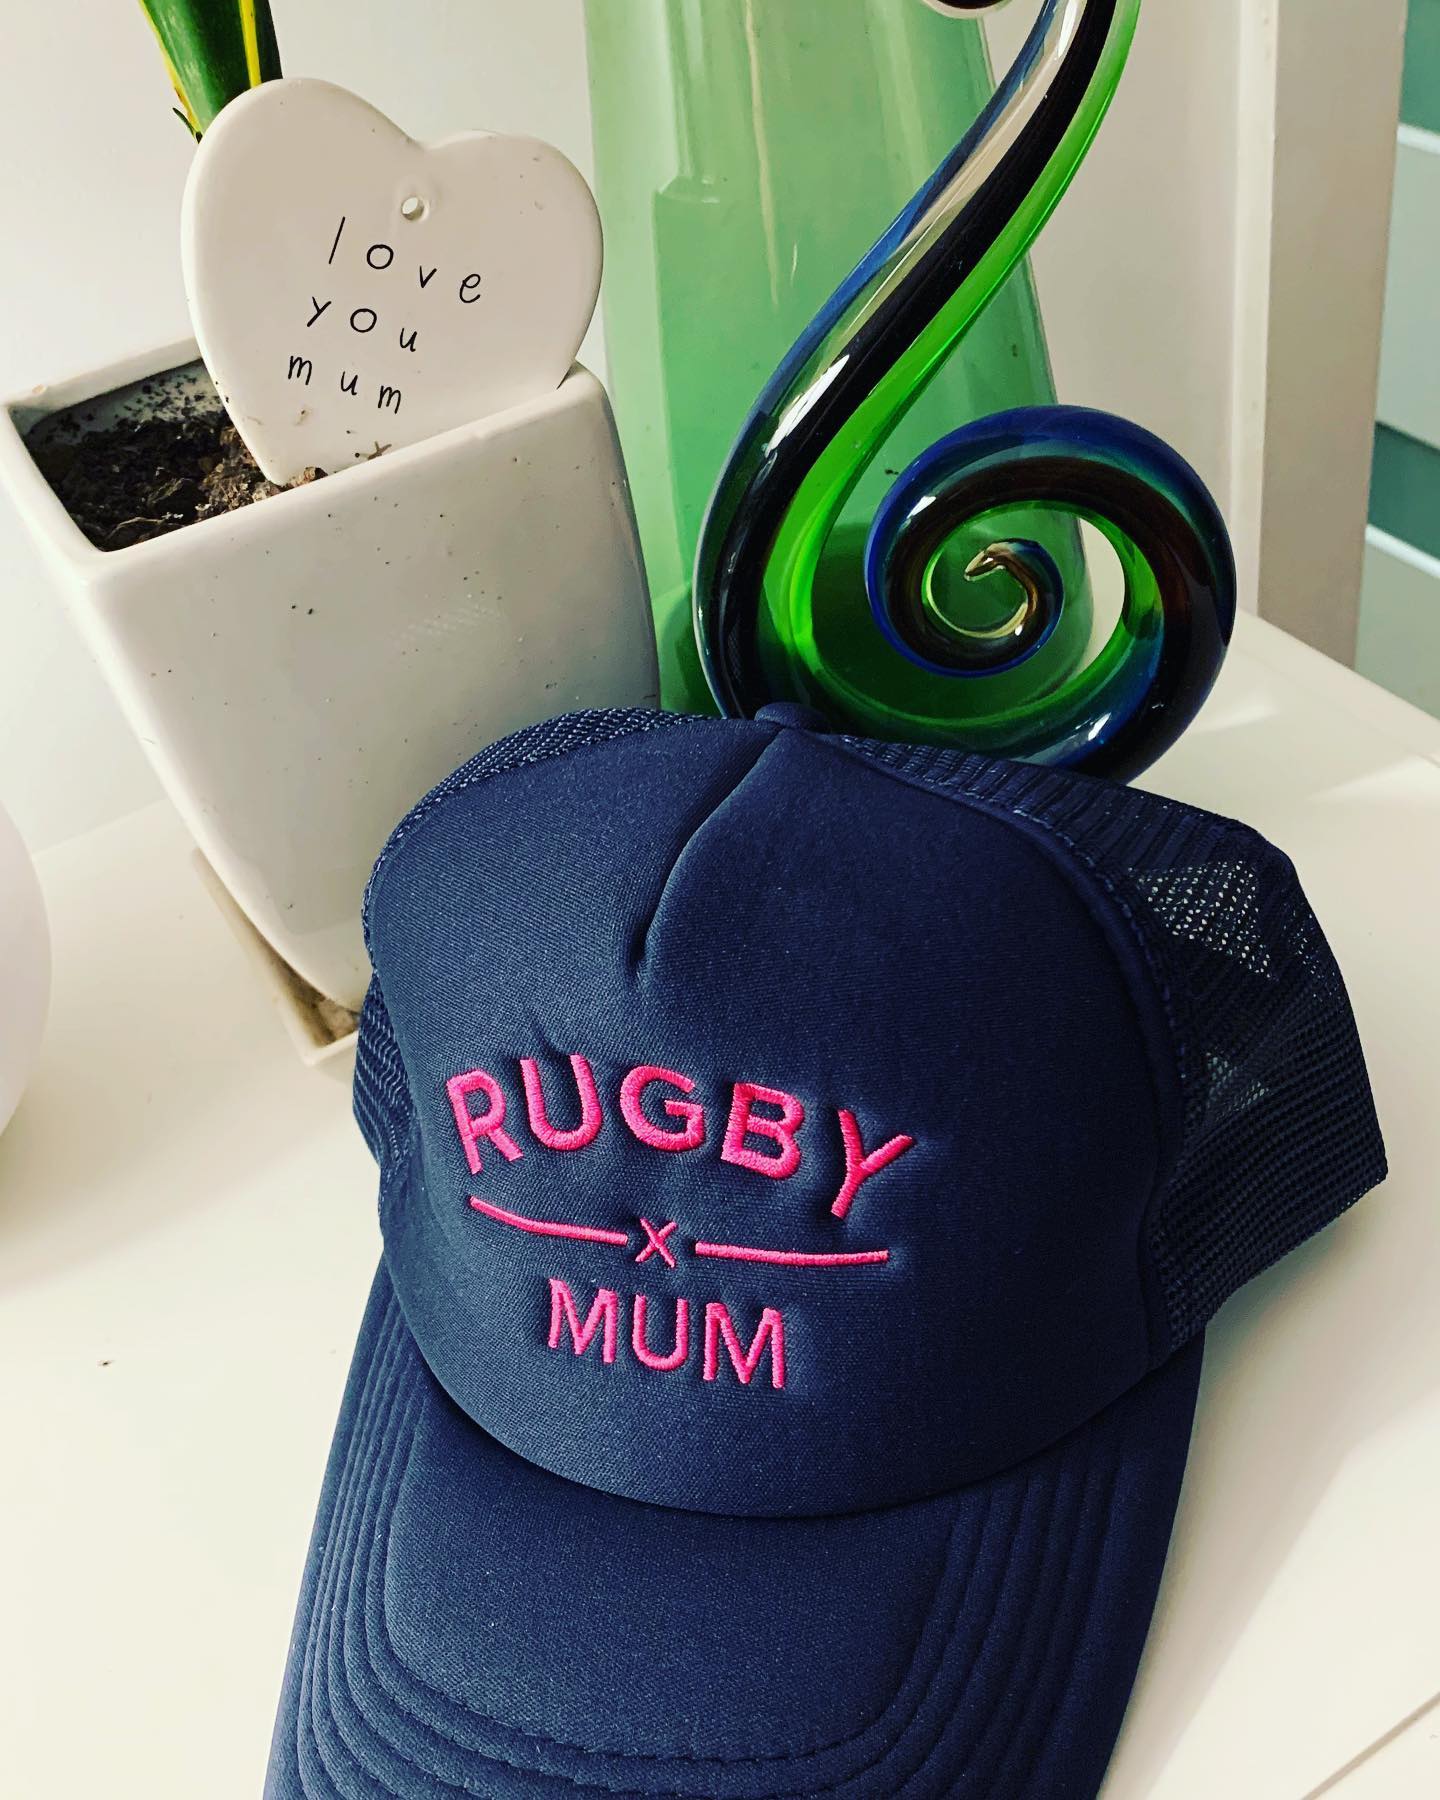 Limited edition Rugby Mum cap for sale from the Club House on Friday Nights $30,...